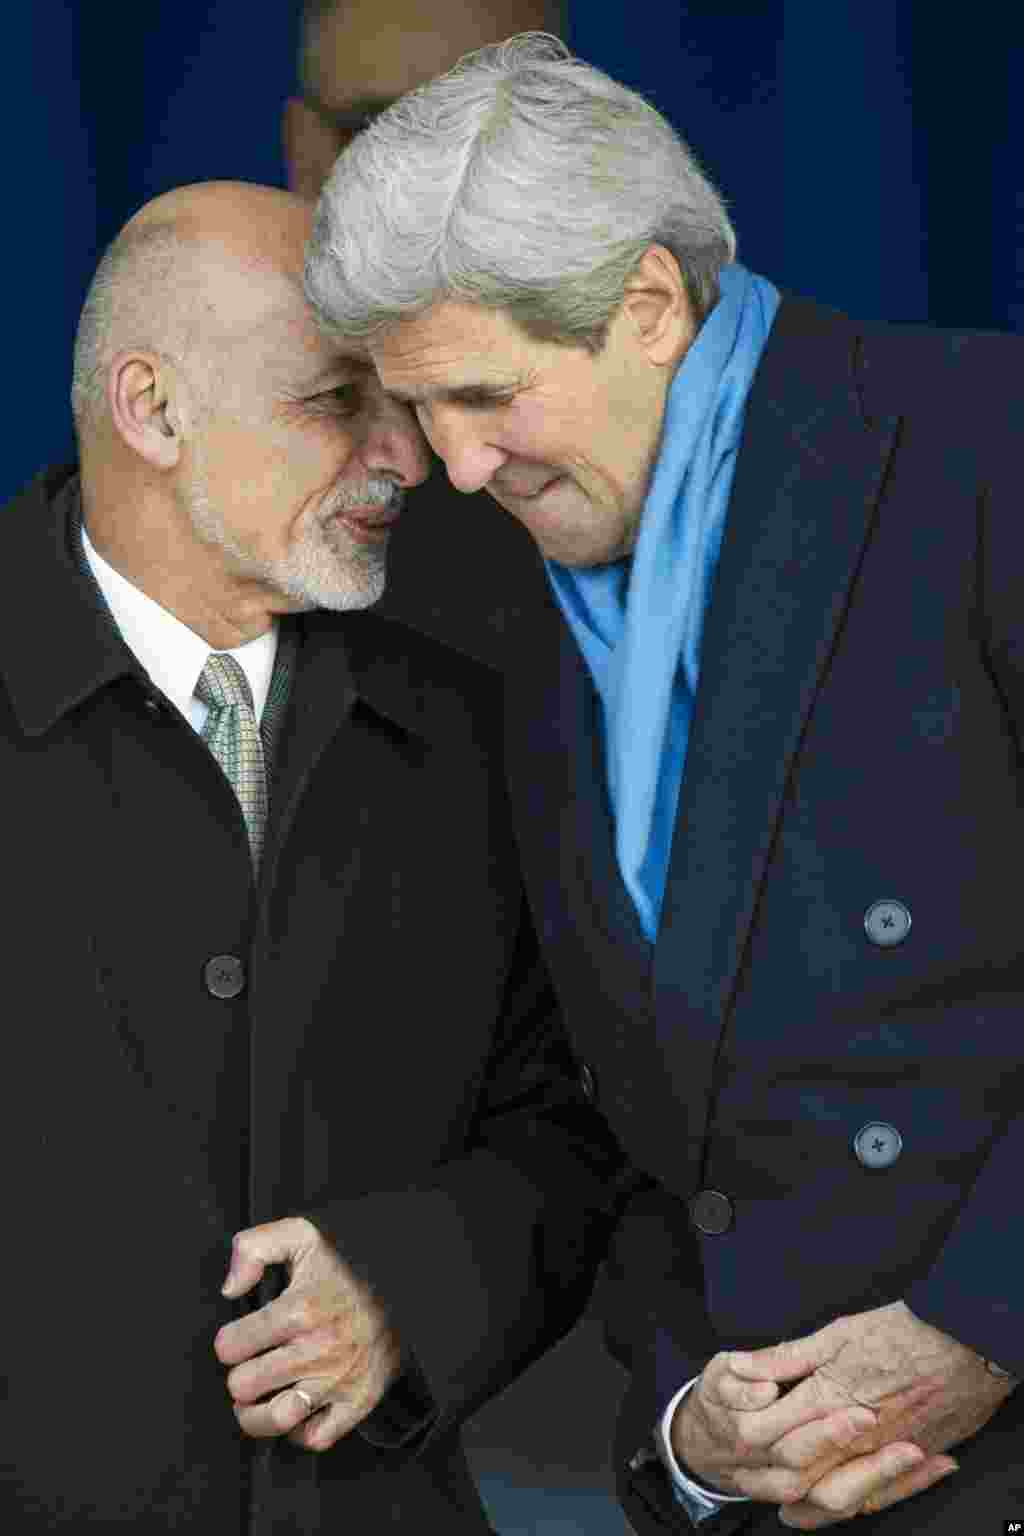 Afghan President Ashraf Ghani speaks with Secretary of State John Kerry at the Pentagon, March 23, 2015.